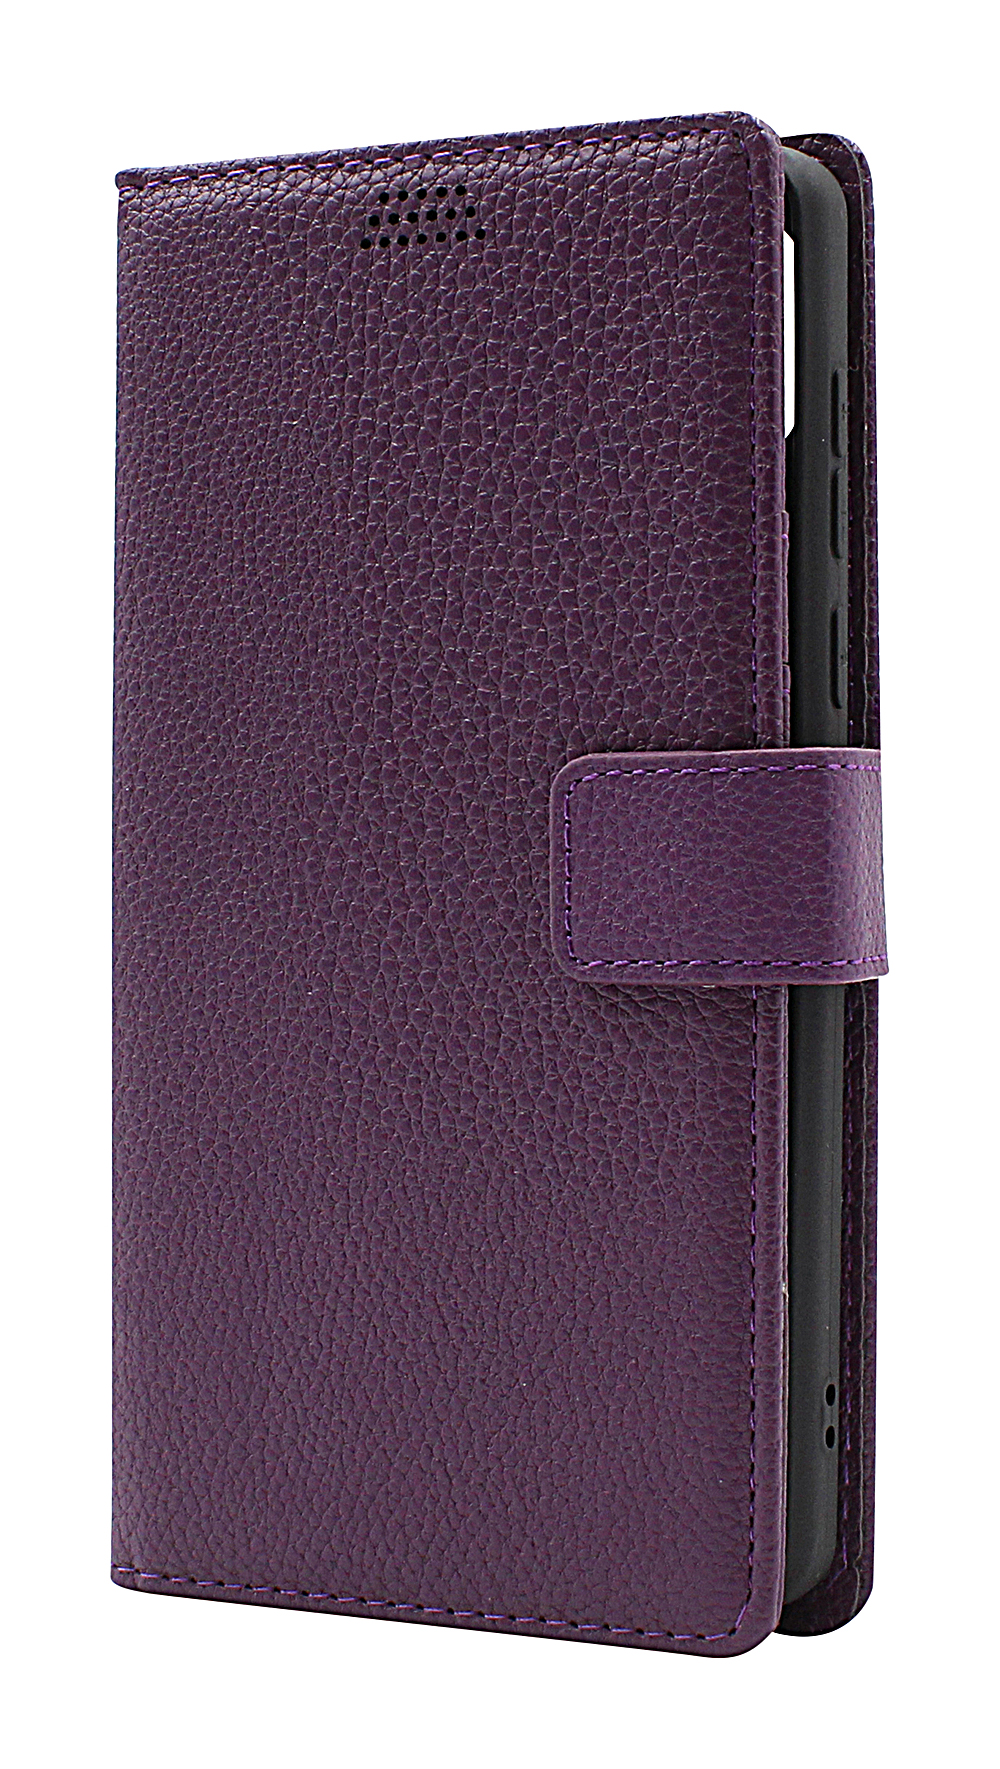 New Standcase Wallet Nokia C2 2nd Edition